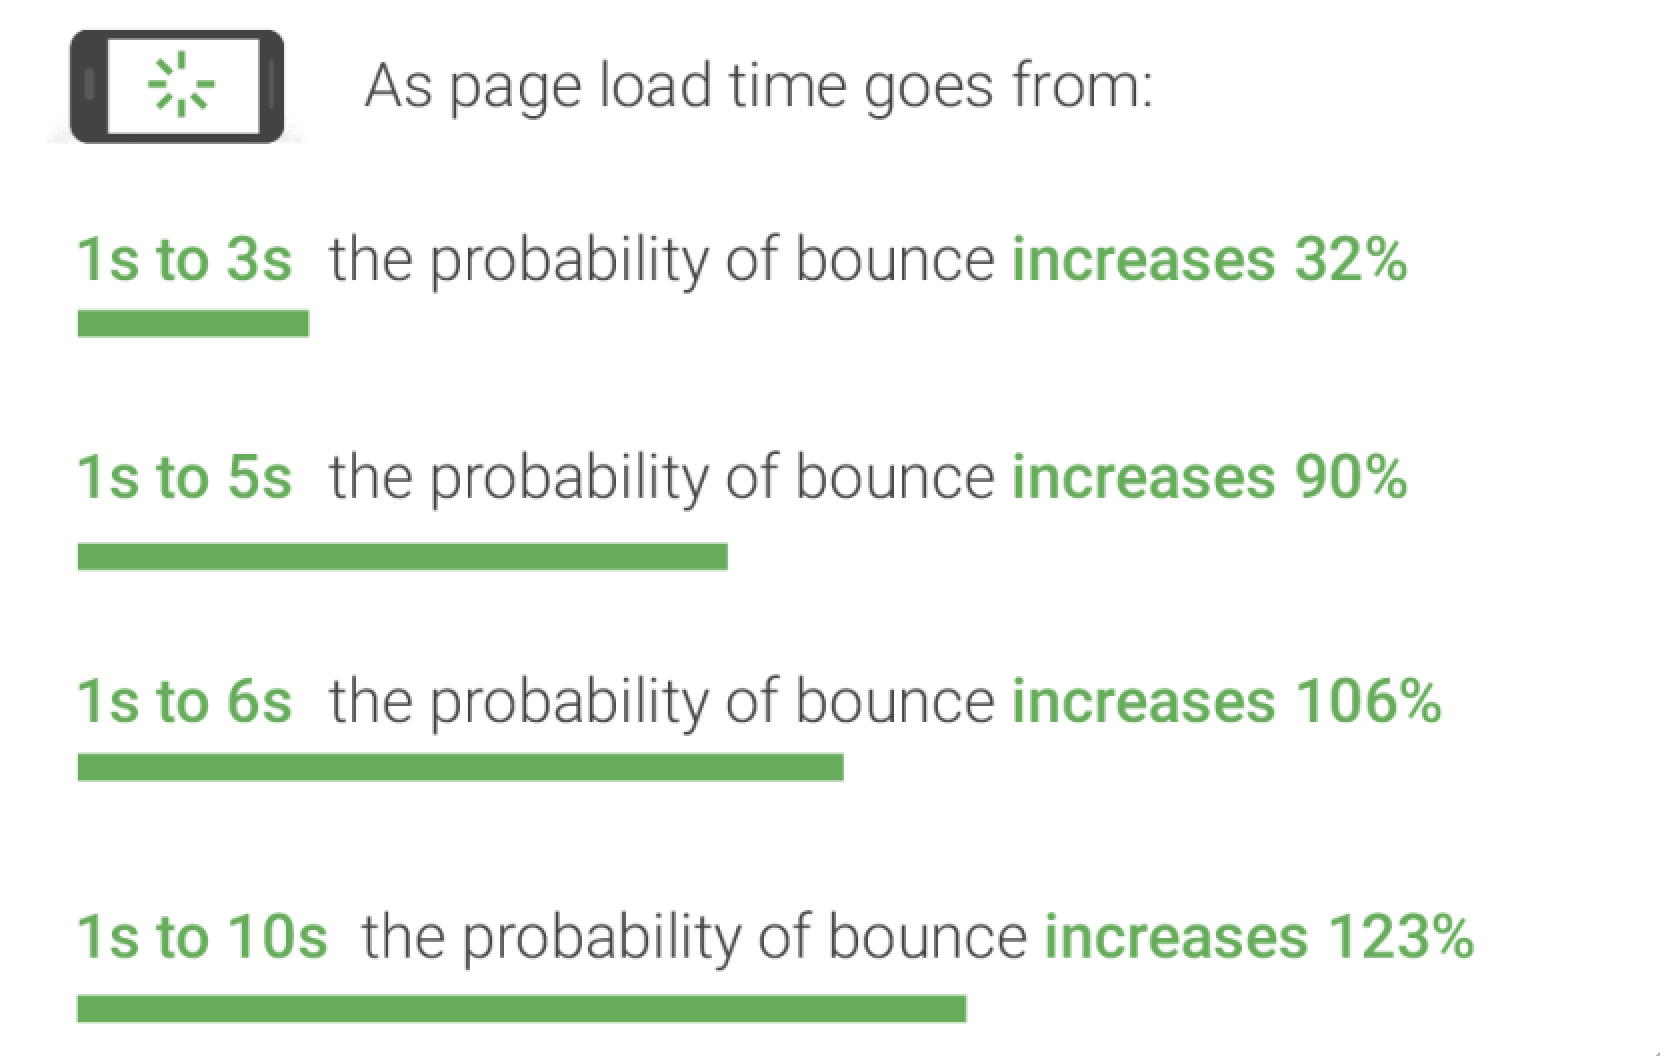 slow page load causes bounces